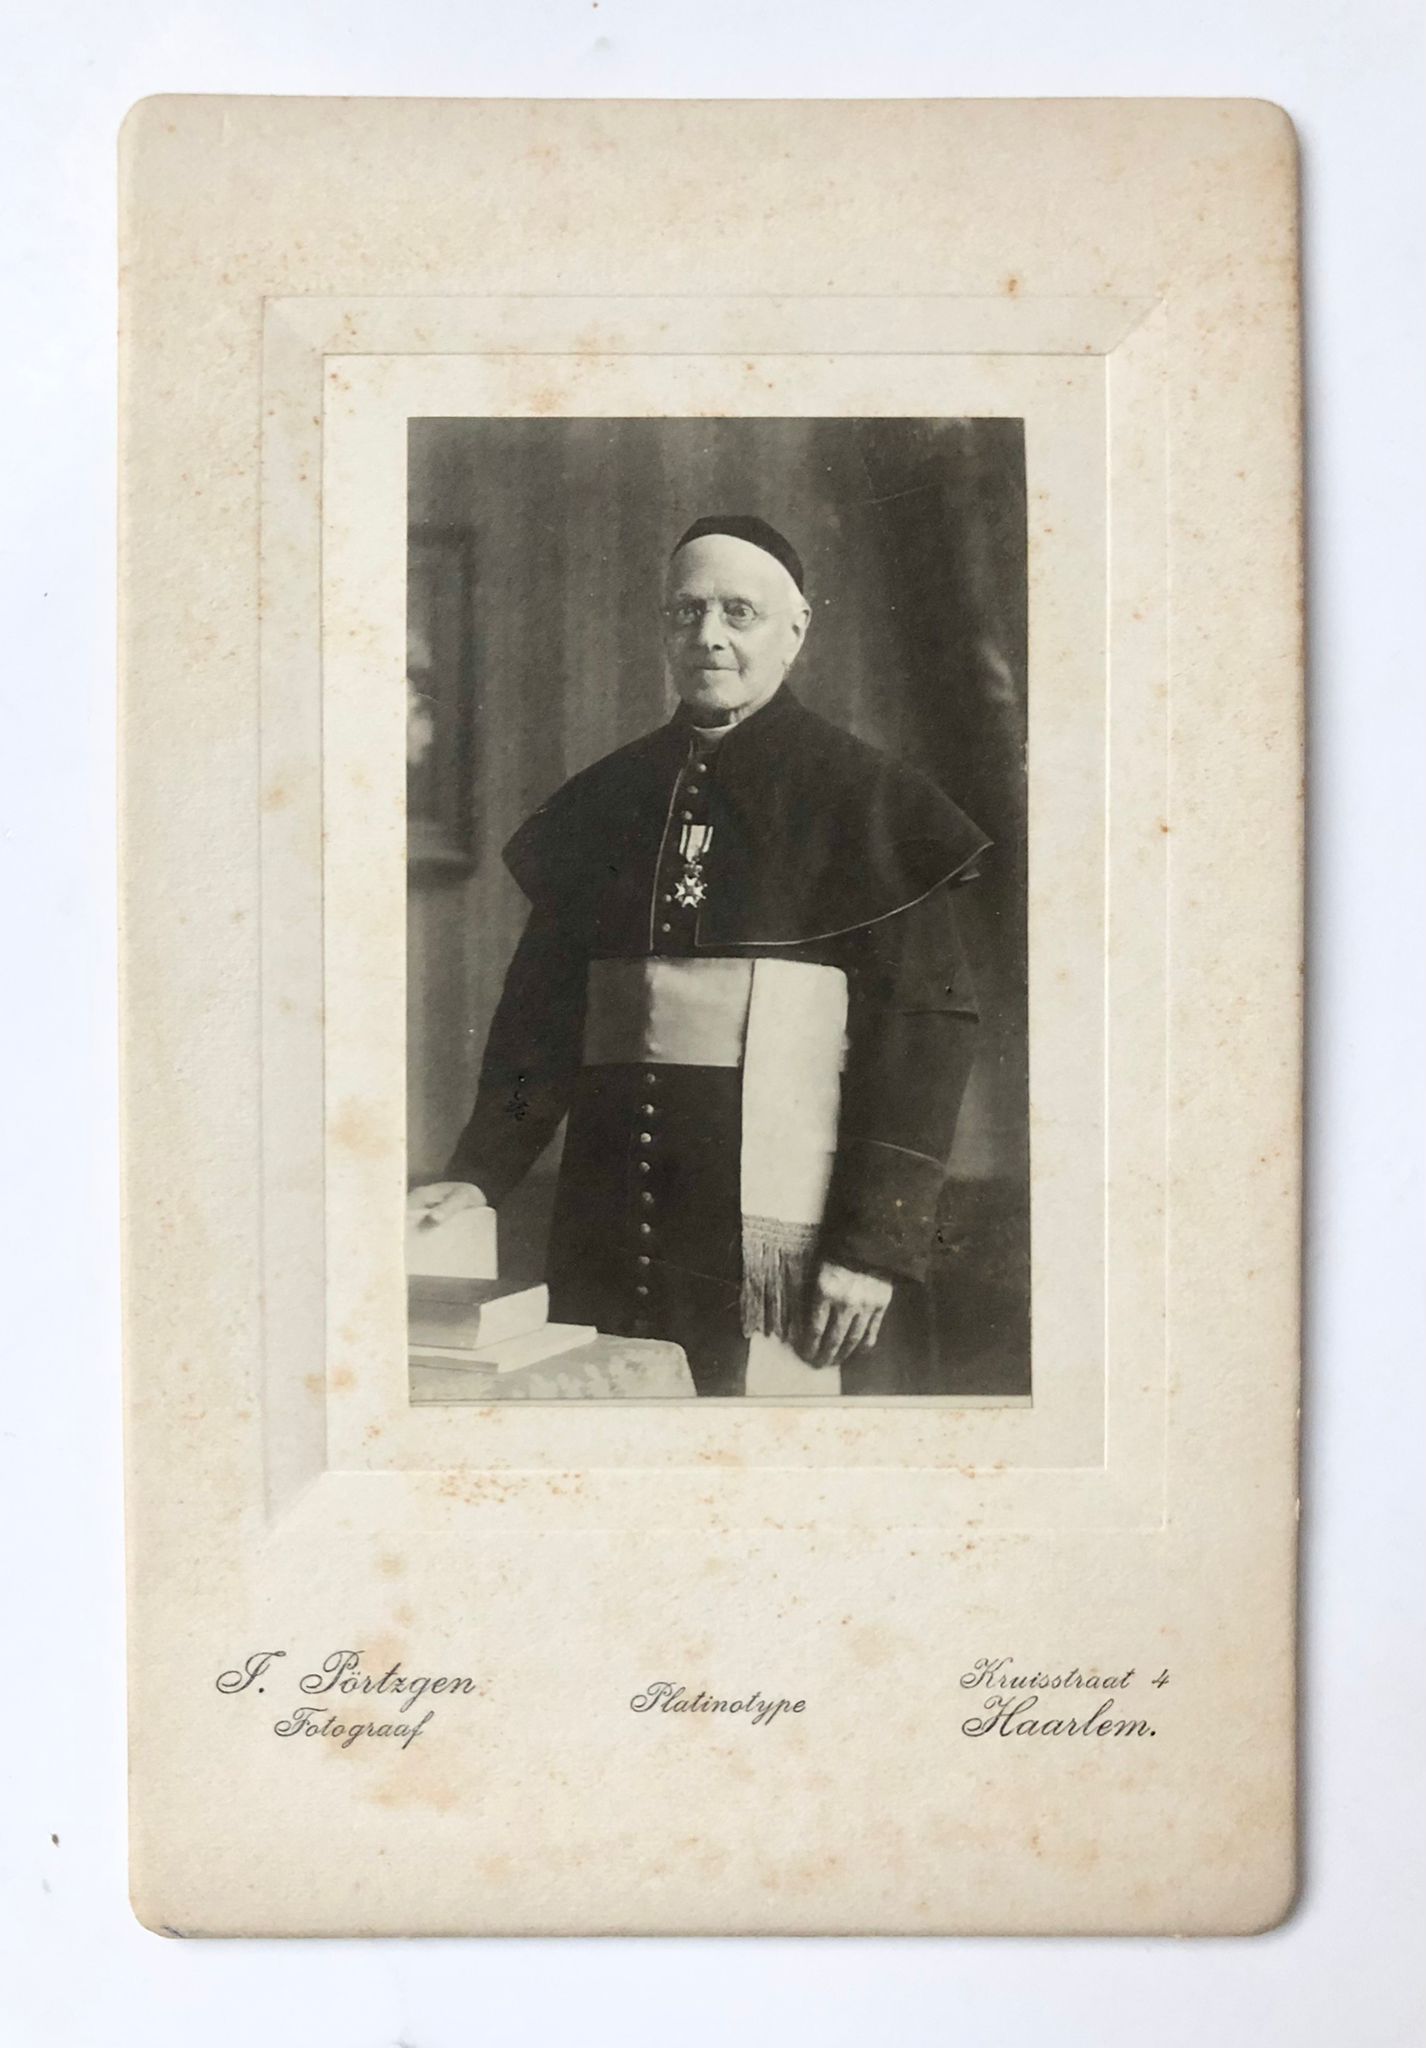 [Photograhy, platinotype, 1907] Photographic portrait, 10 x 7 cm, for the 50 year of priesthood of A.J. Brouwer, 1857-1907, vicaris-generaal in the Roman Catholic church, 1 p.